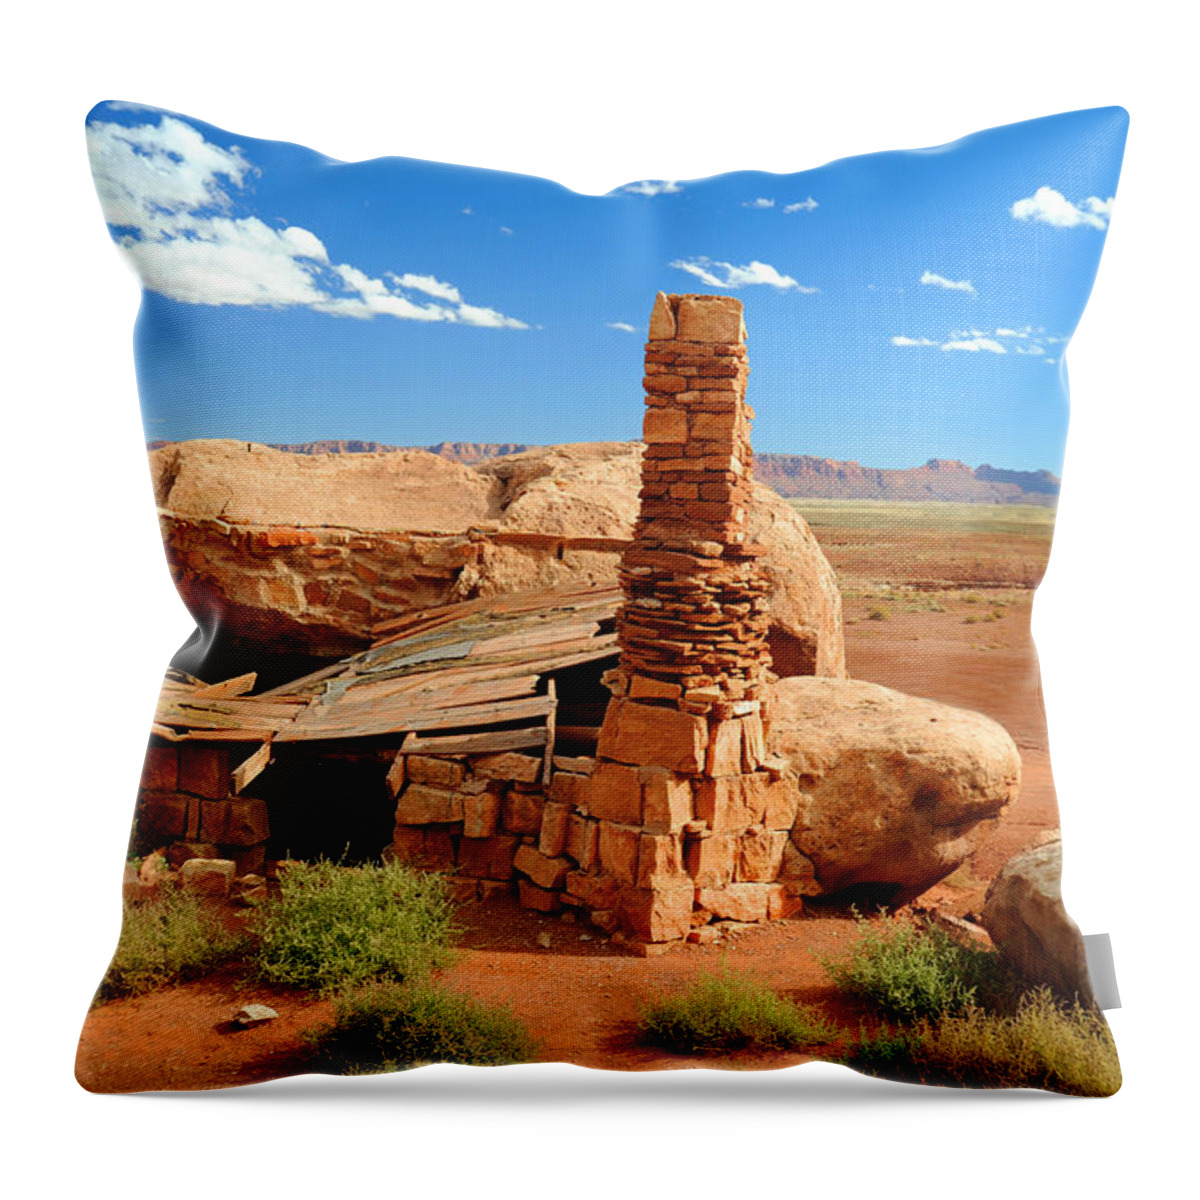 Photograph Throw Pillow featuring the photograph Cliff Dwellers by Richard Gehlbach